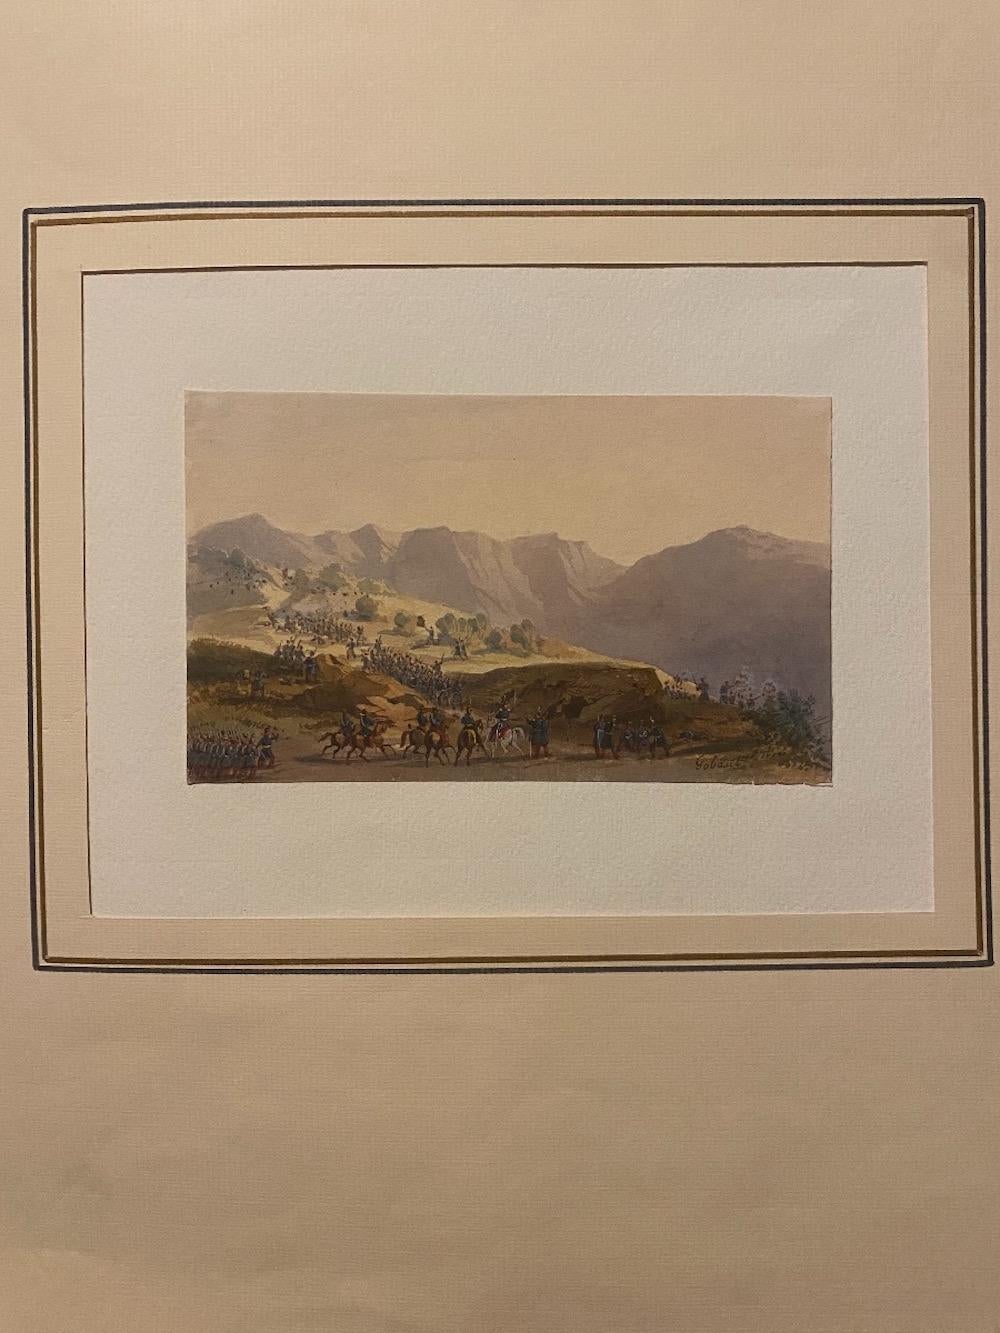 Troop Movement - Original Ink and Watercolor by Gaspard Gobaut - 19th Century - Art by Gobaut Gaspard